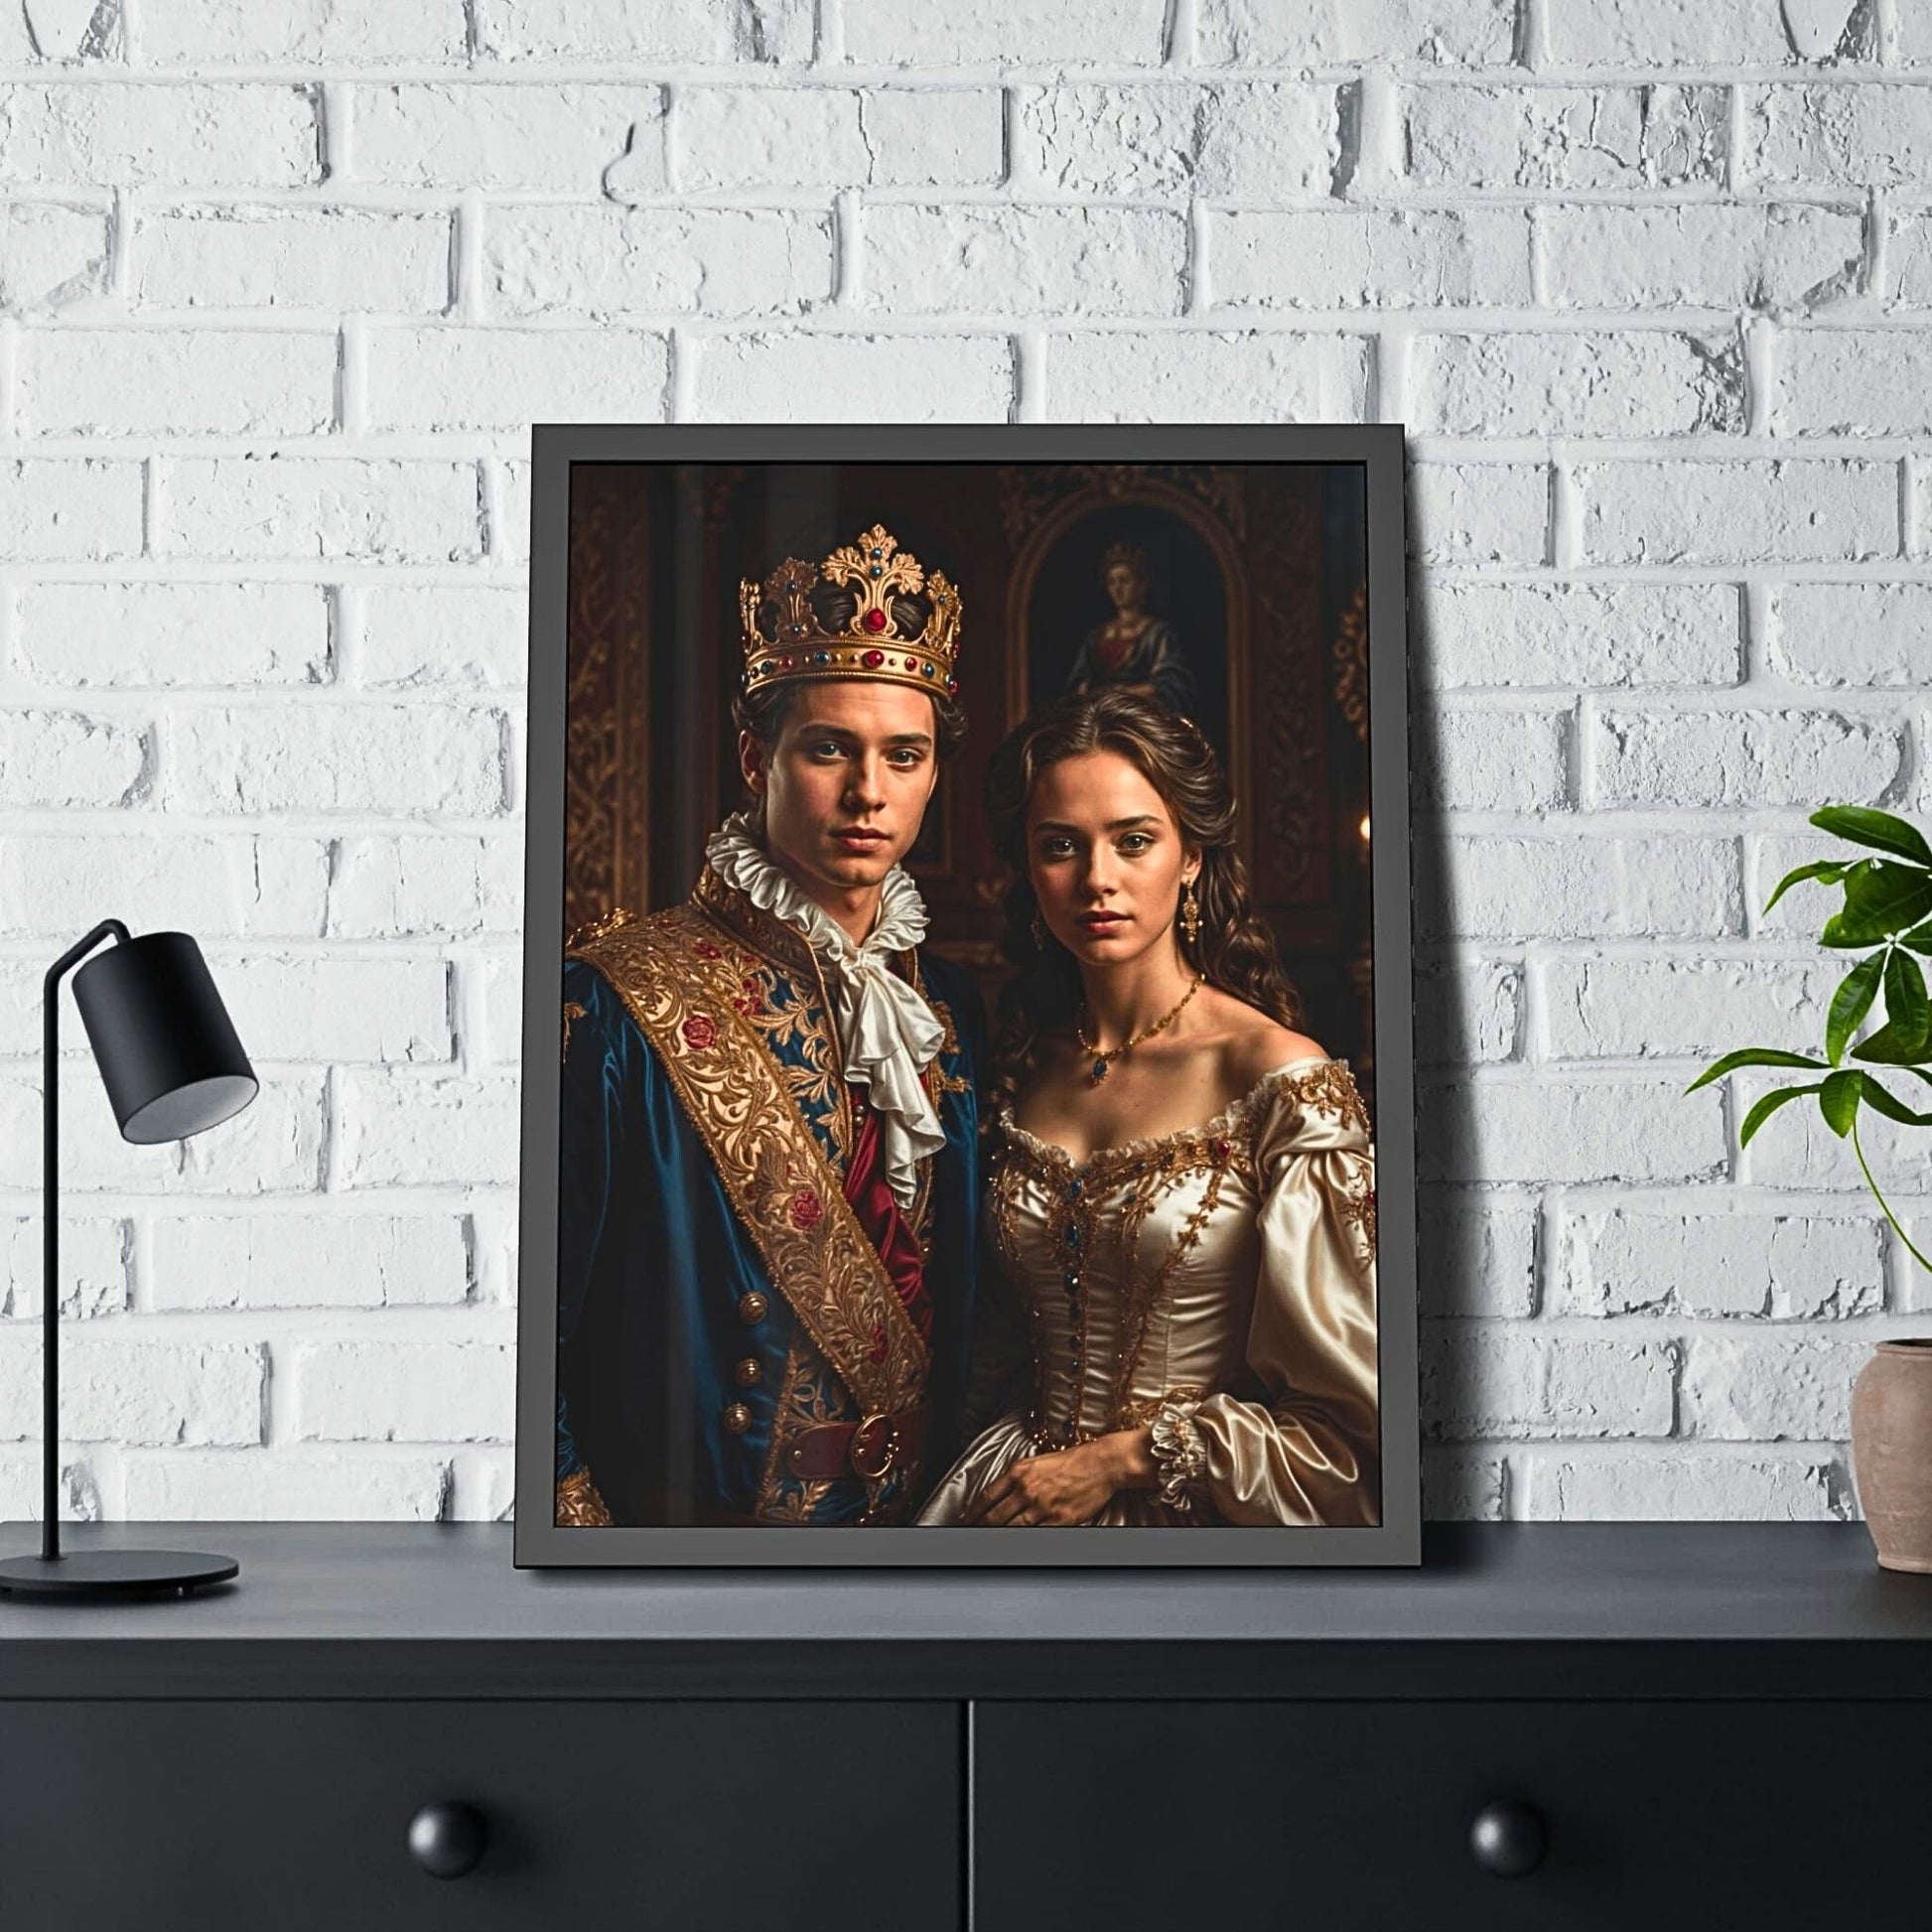 Create magical memories with custom royal couple portraits from your photos. Perfect for anniversaries, birthdays, and special occasions. Choose from Victorian, Renaissance, or fairytale themes. Personalized canvas prints make unique gifts for couples, family, and friends. Turn your loved ones into royalty with our exclusive designs. Order your custom portrait today!